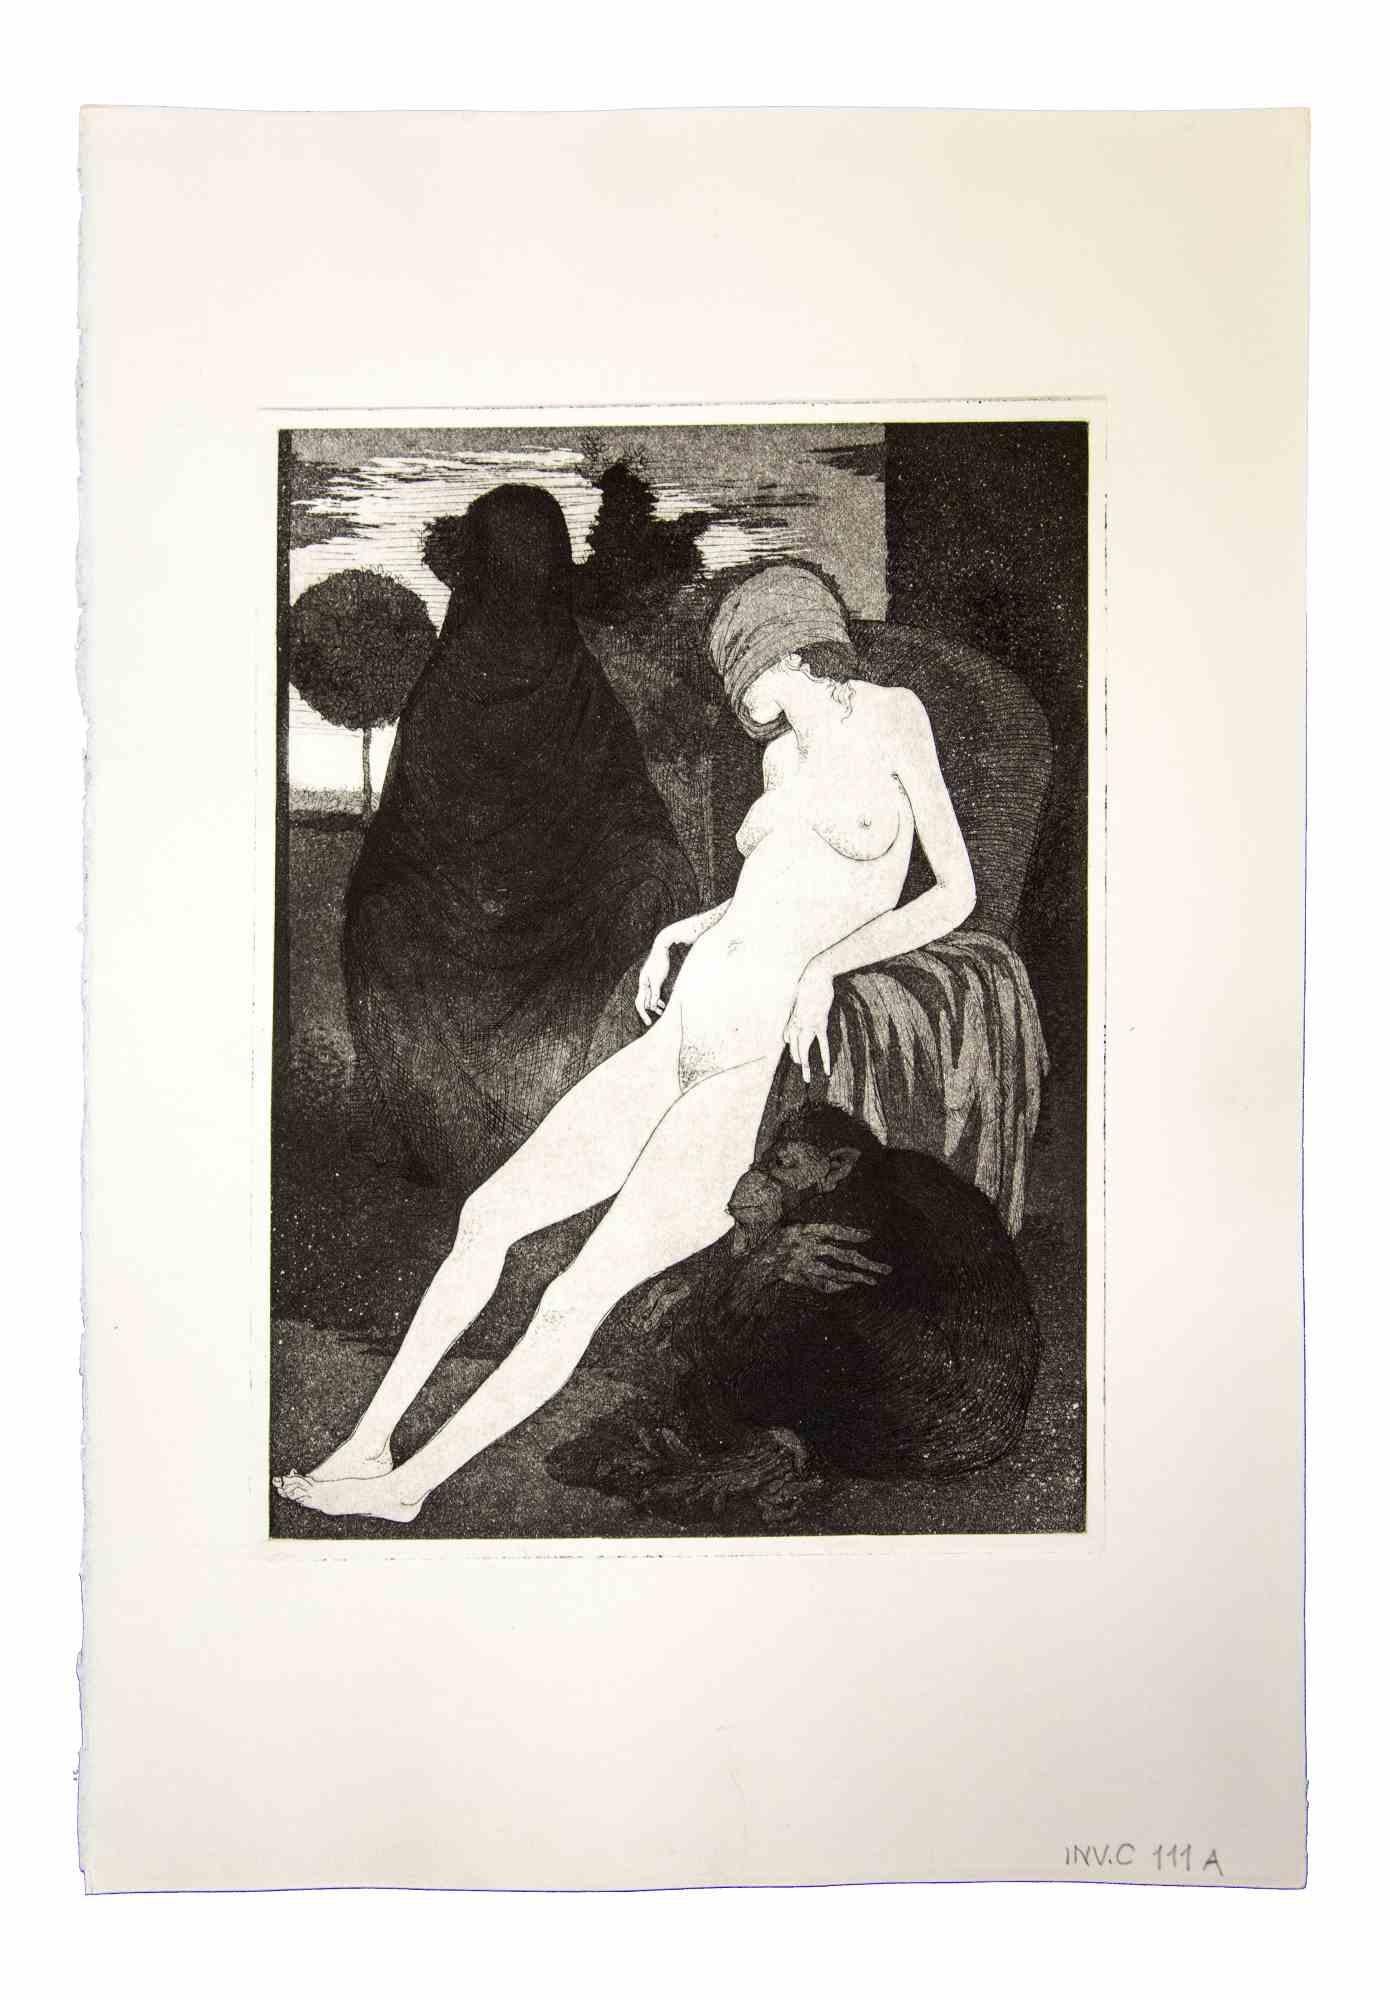 Blindfold Sibyl is an original etching and aquatint realized by Leo Guida in 1970S.

Guter Zustand.

Mounted on a white cardboard passpartout (50x34).

Artist proof.

Leo Guida  (1992 - 2017). Sensitive to current issues, artistic movements and